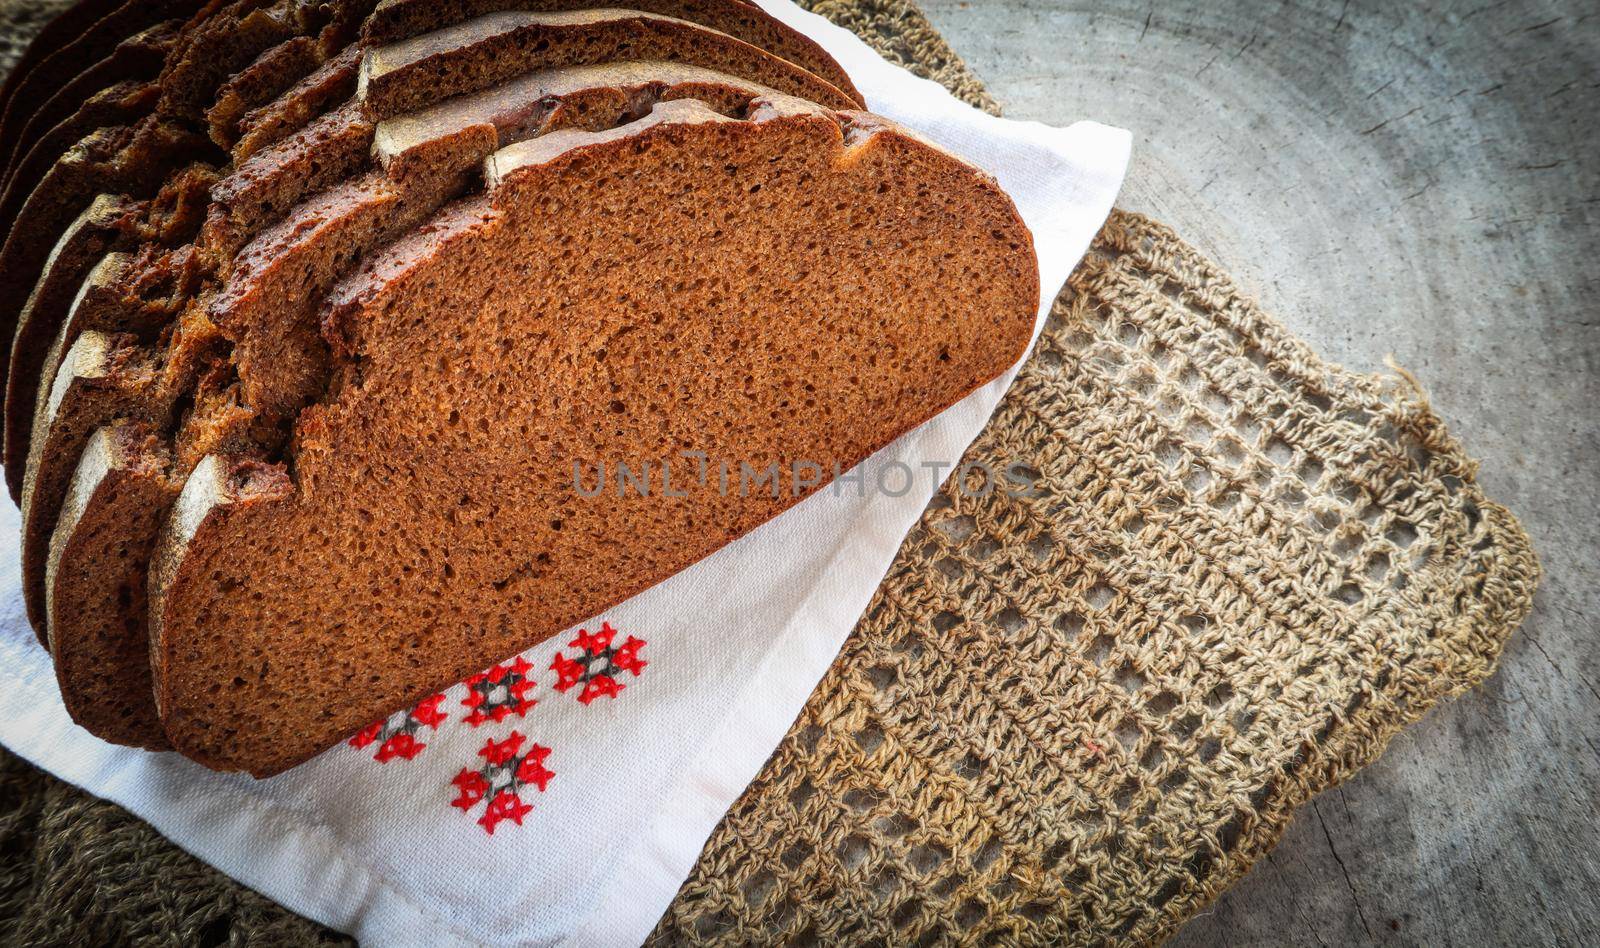 Fresh rye sliced bread, natural linen napkin and white serviette with cross-stitch on rustic wooden background